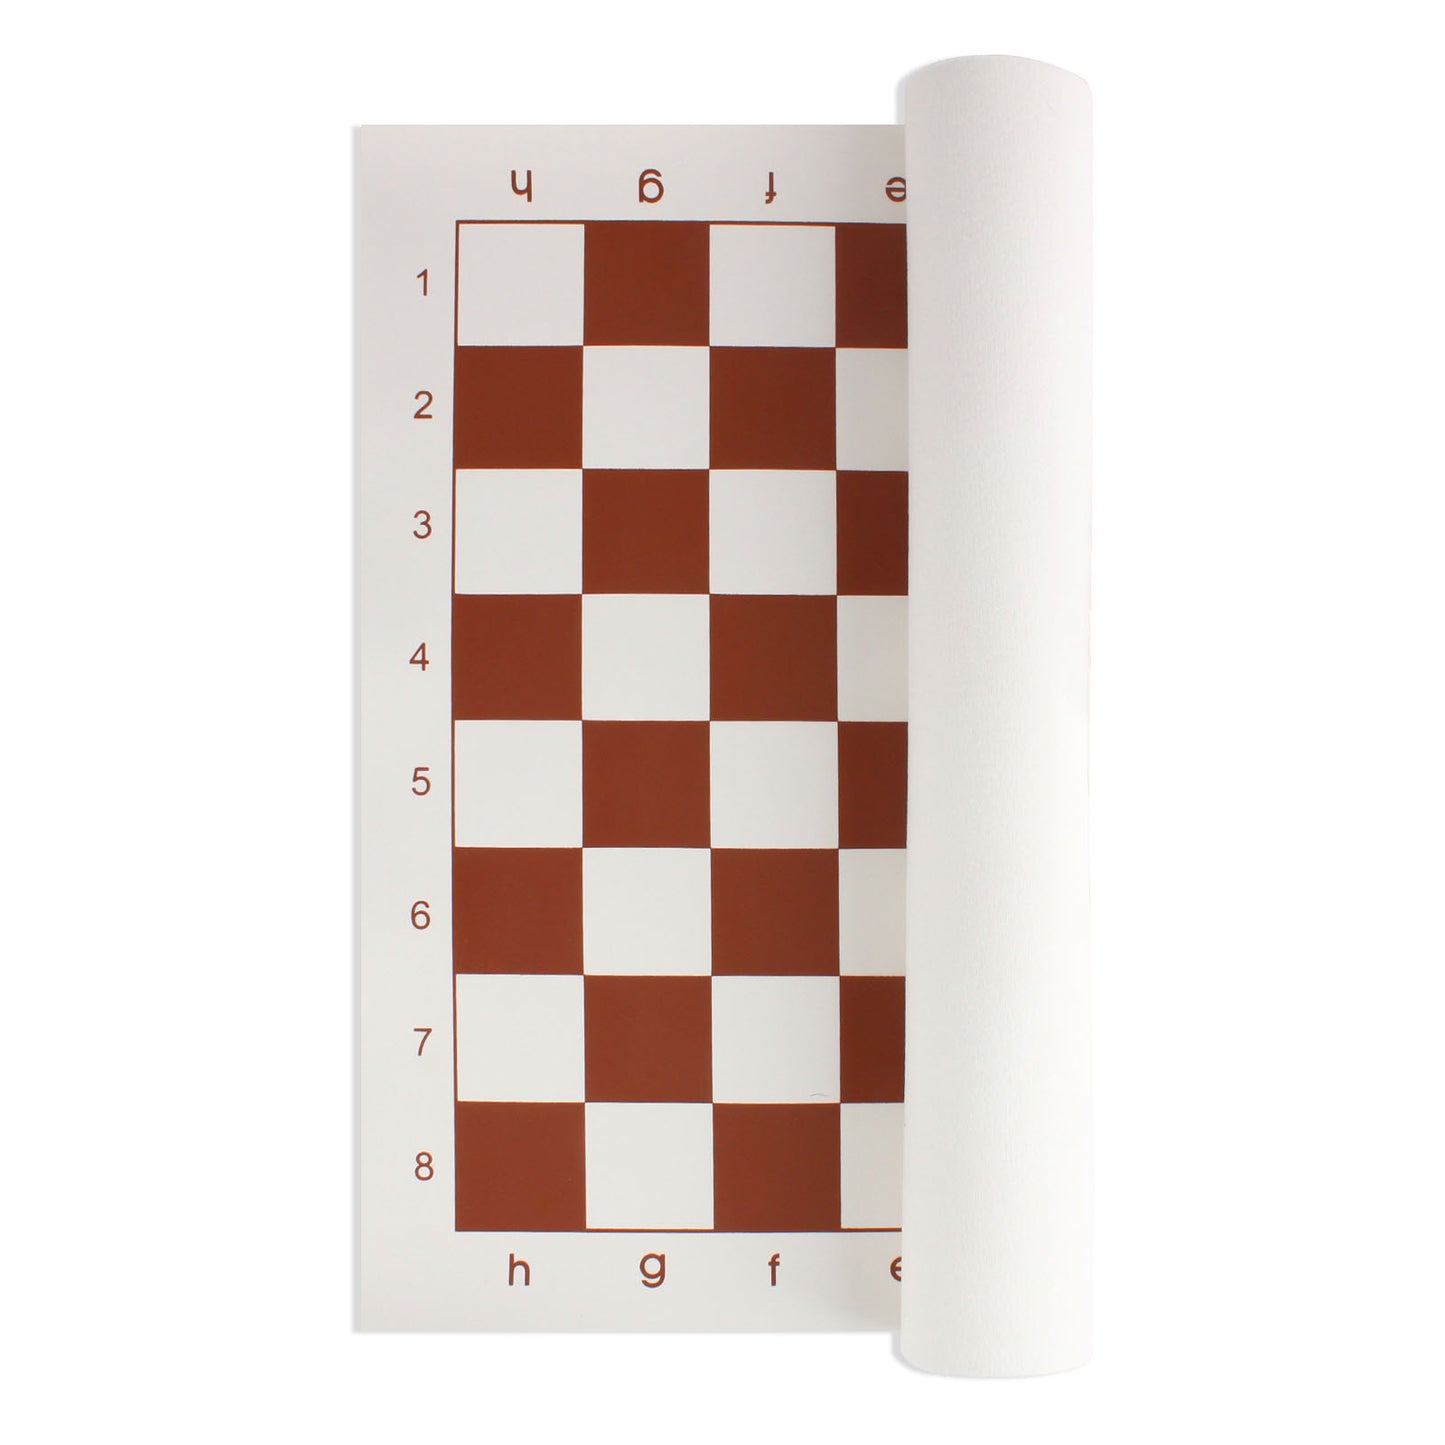 Andux Chess Pieces and Rollable Board QPXQ-01 (Brown,35x35cm)